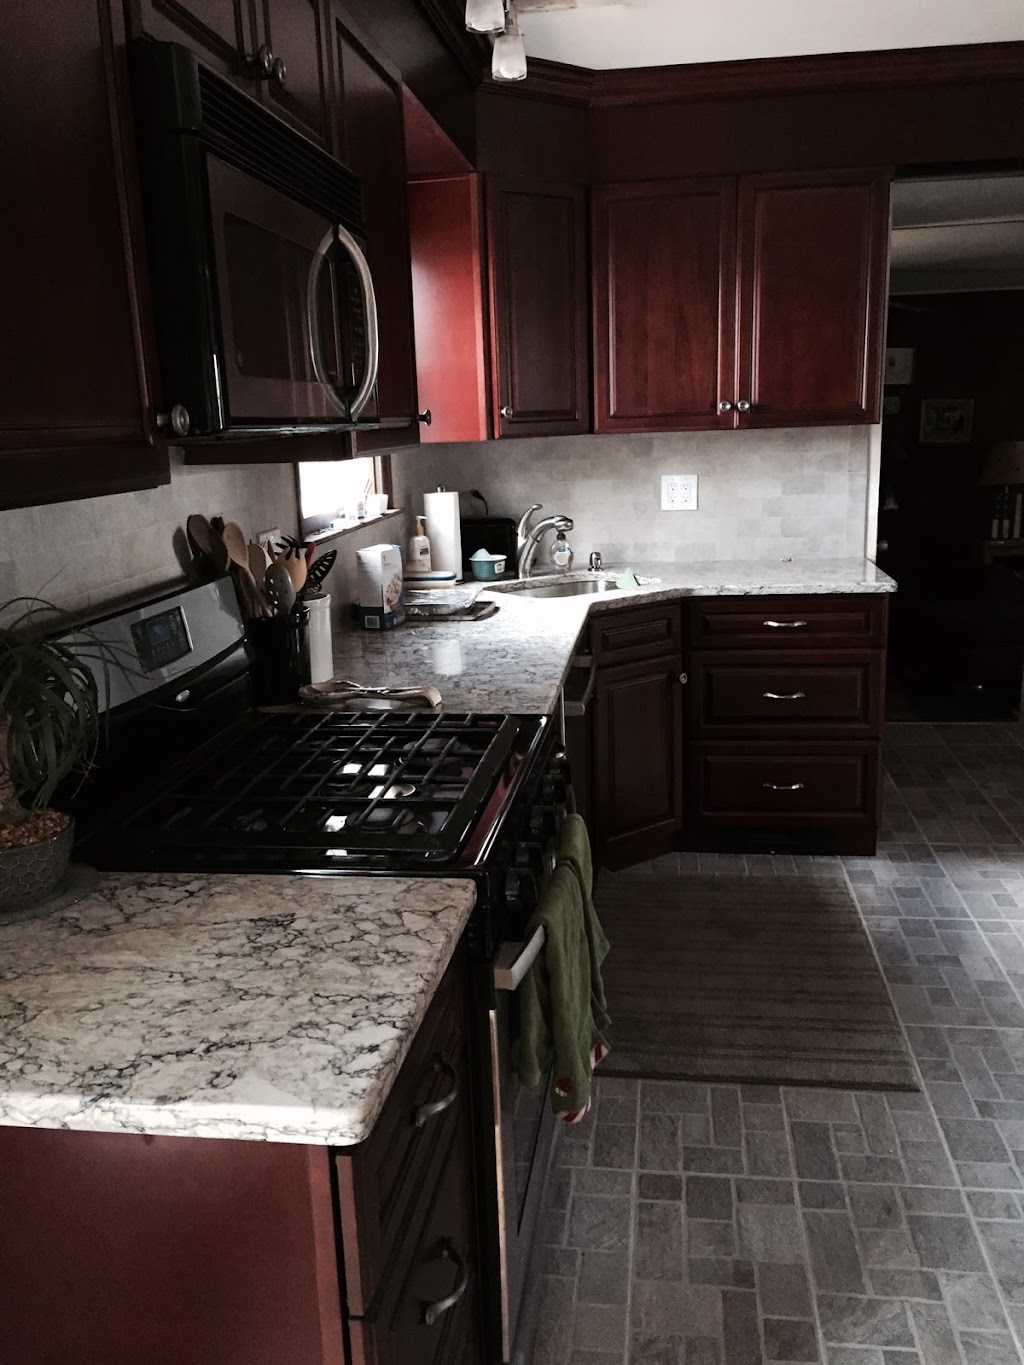 Custom Kitchen World Inc | 91 N Middletown Rd, Pearl River, NY 10965 | Phone: (845) 735-5463